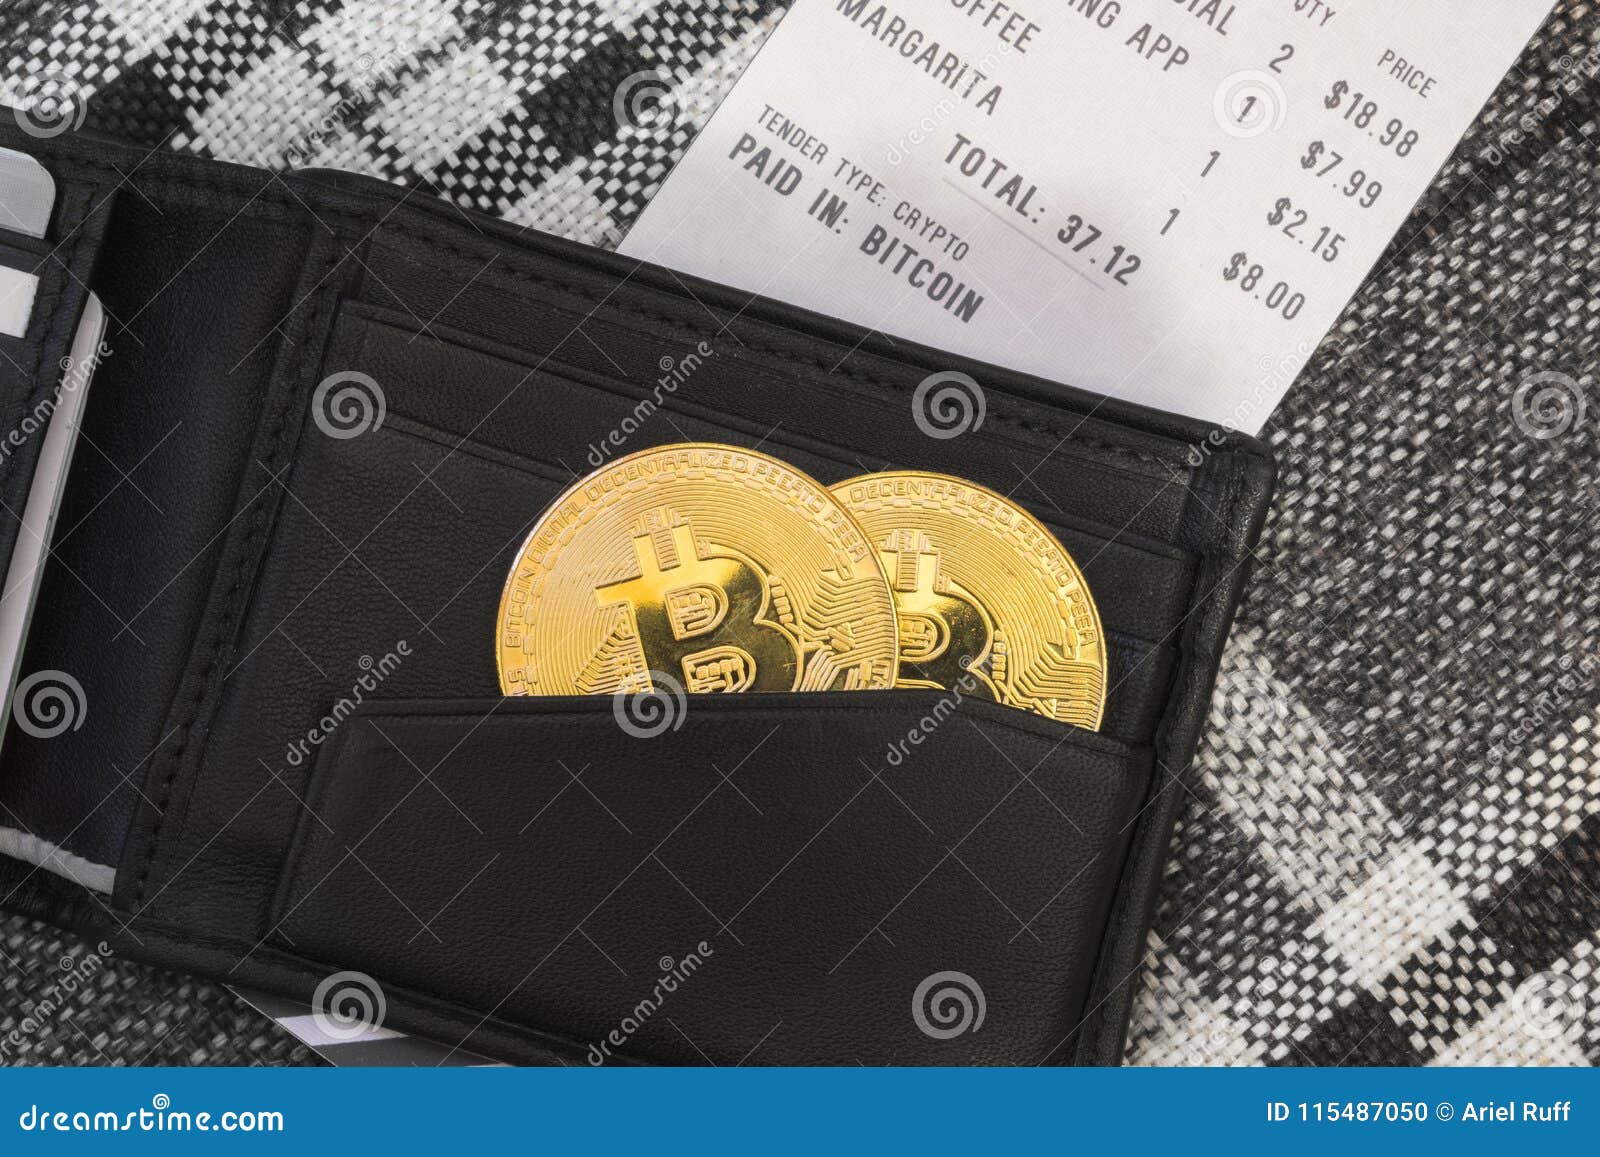 Bitcoin In A Wallet At A Restaurant Stock Photo Image Of Business - 